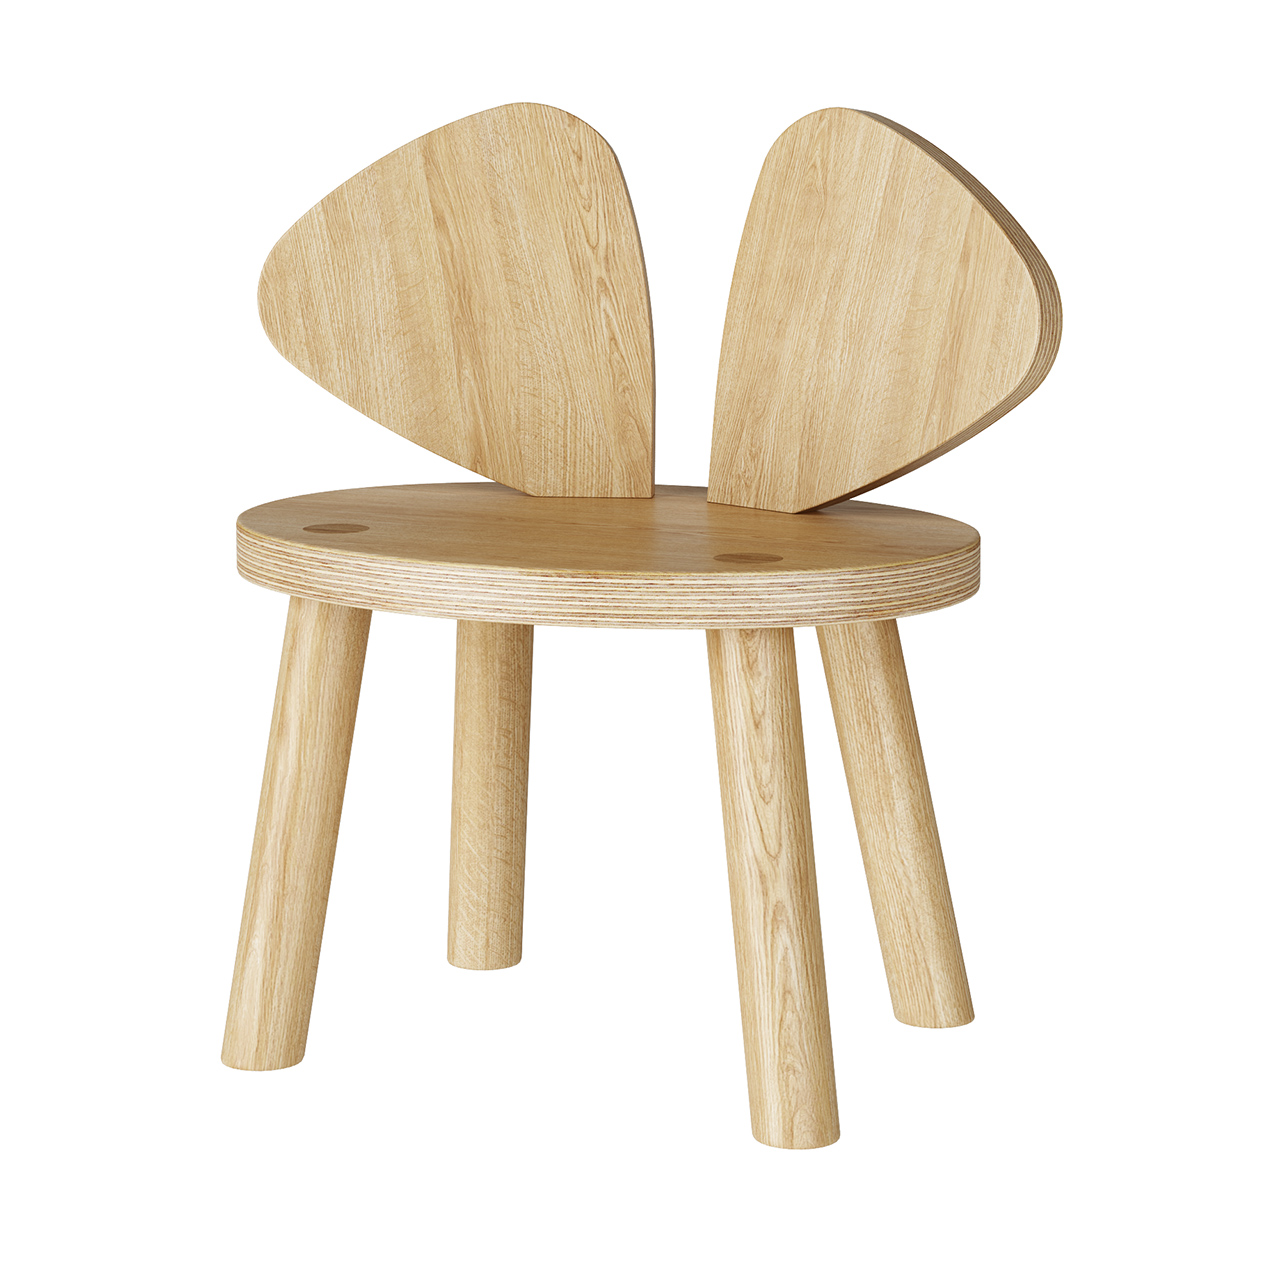 mouse-chair-oak-2-5-years-by-nofred.jpg